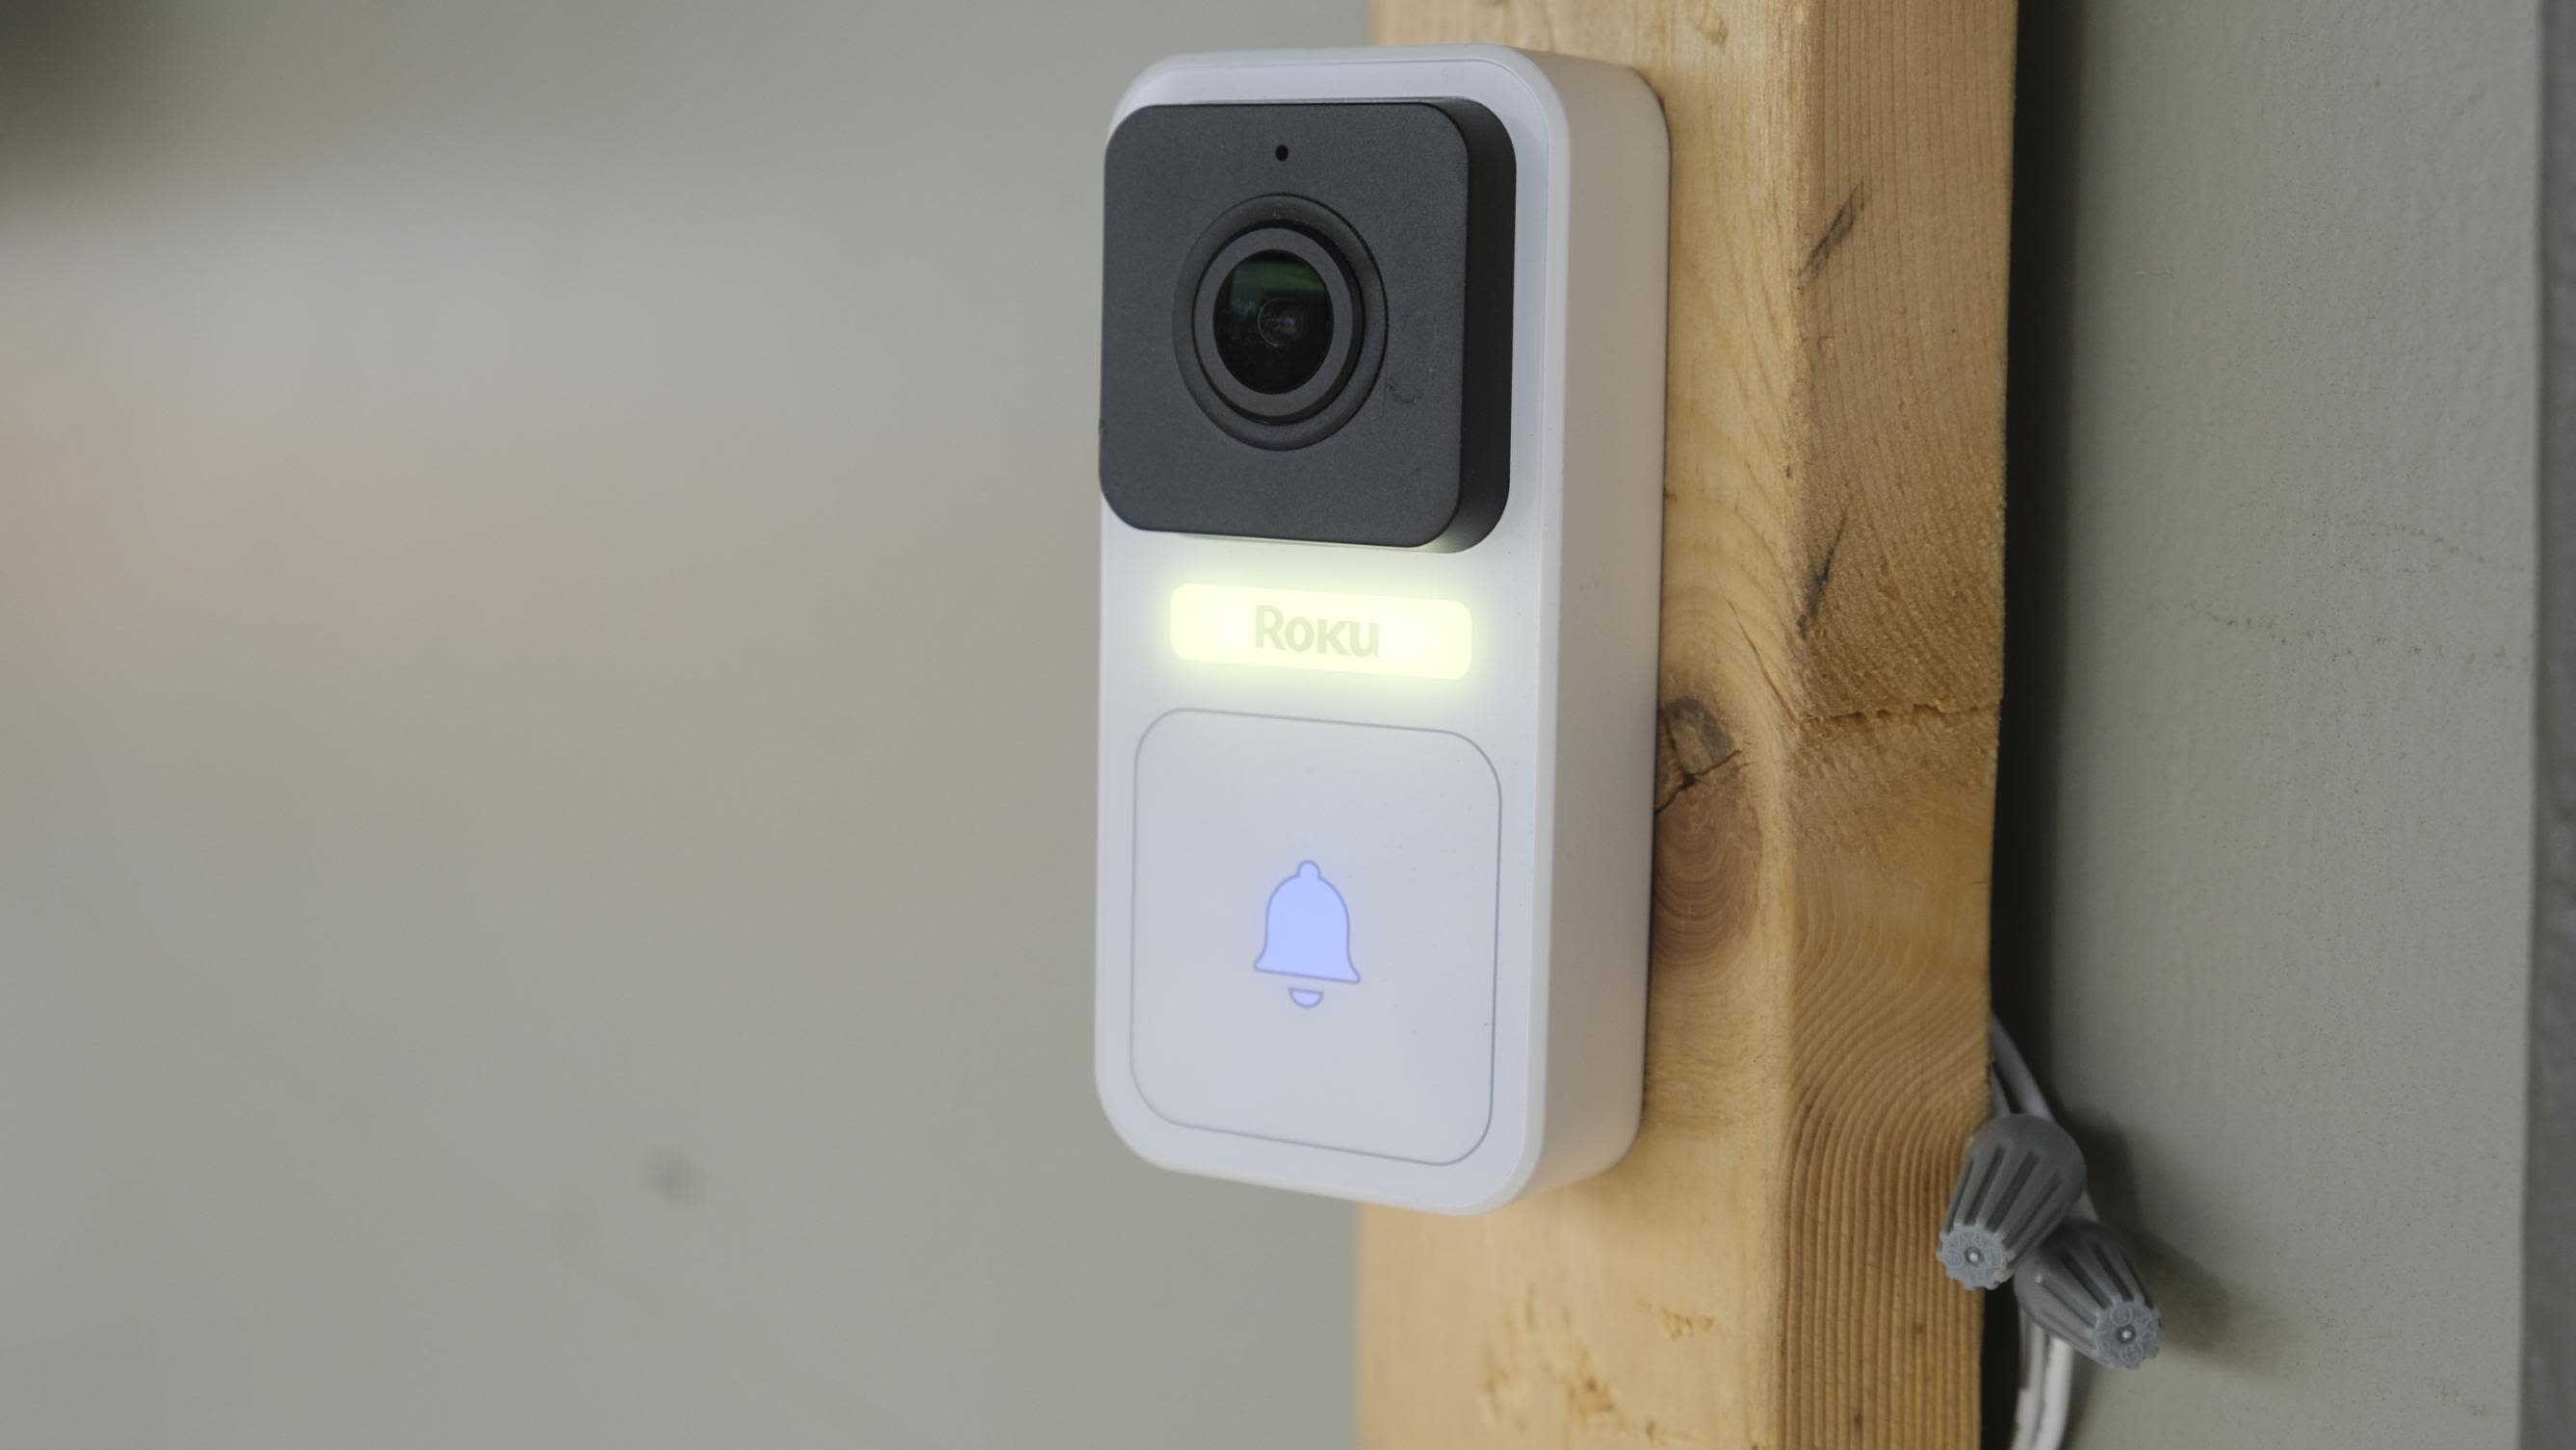 Roku Video Doorbell review: Here's what $80 gets you